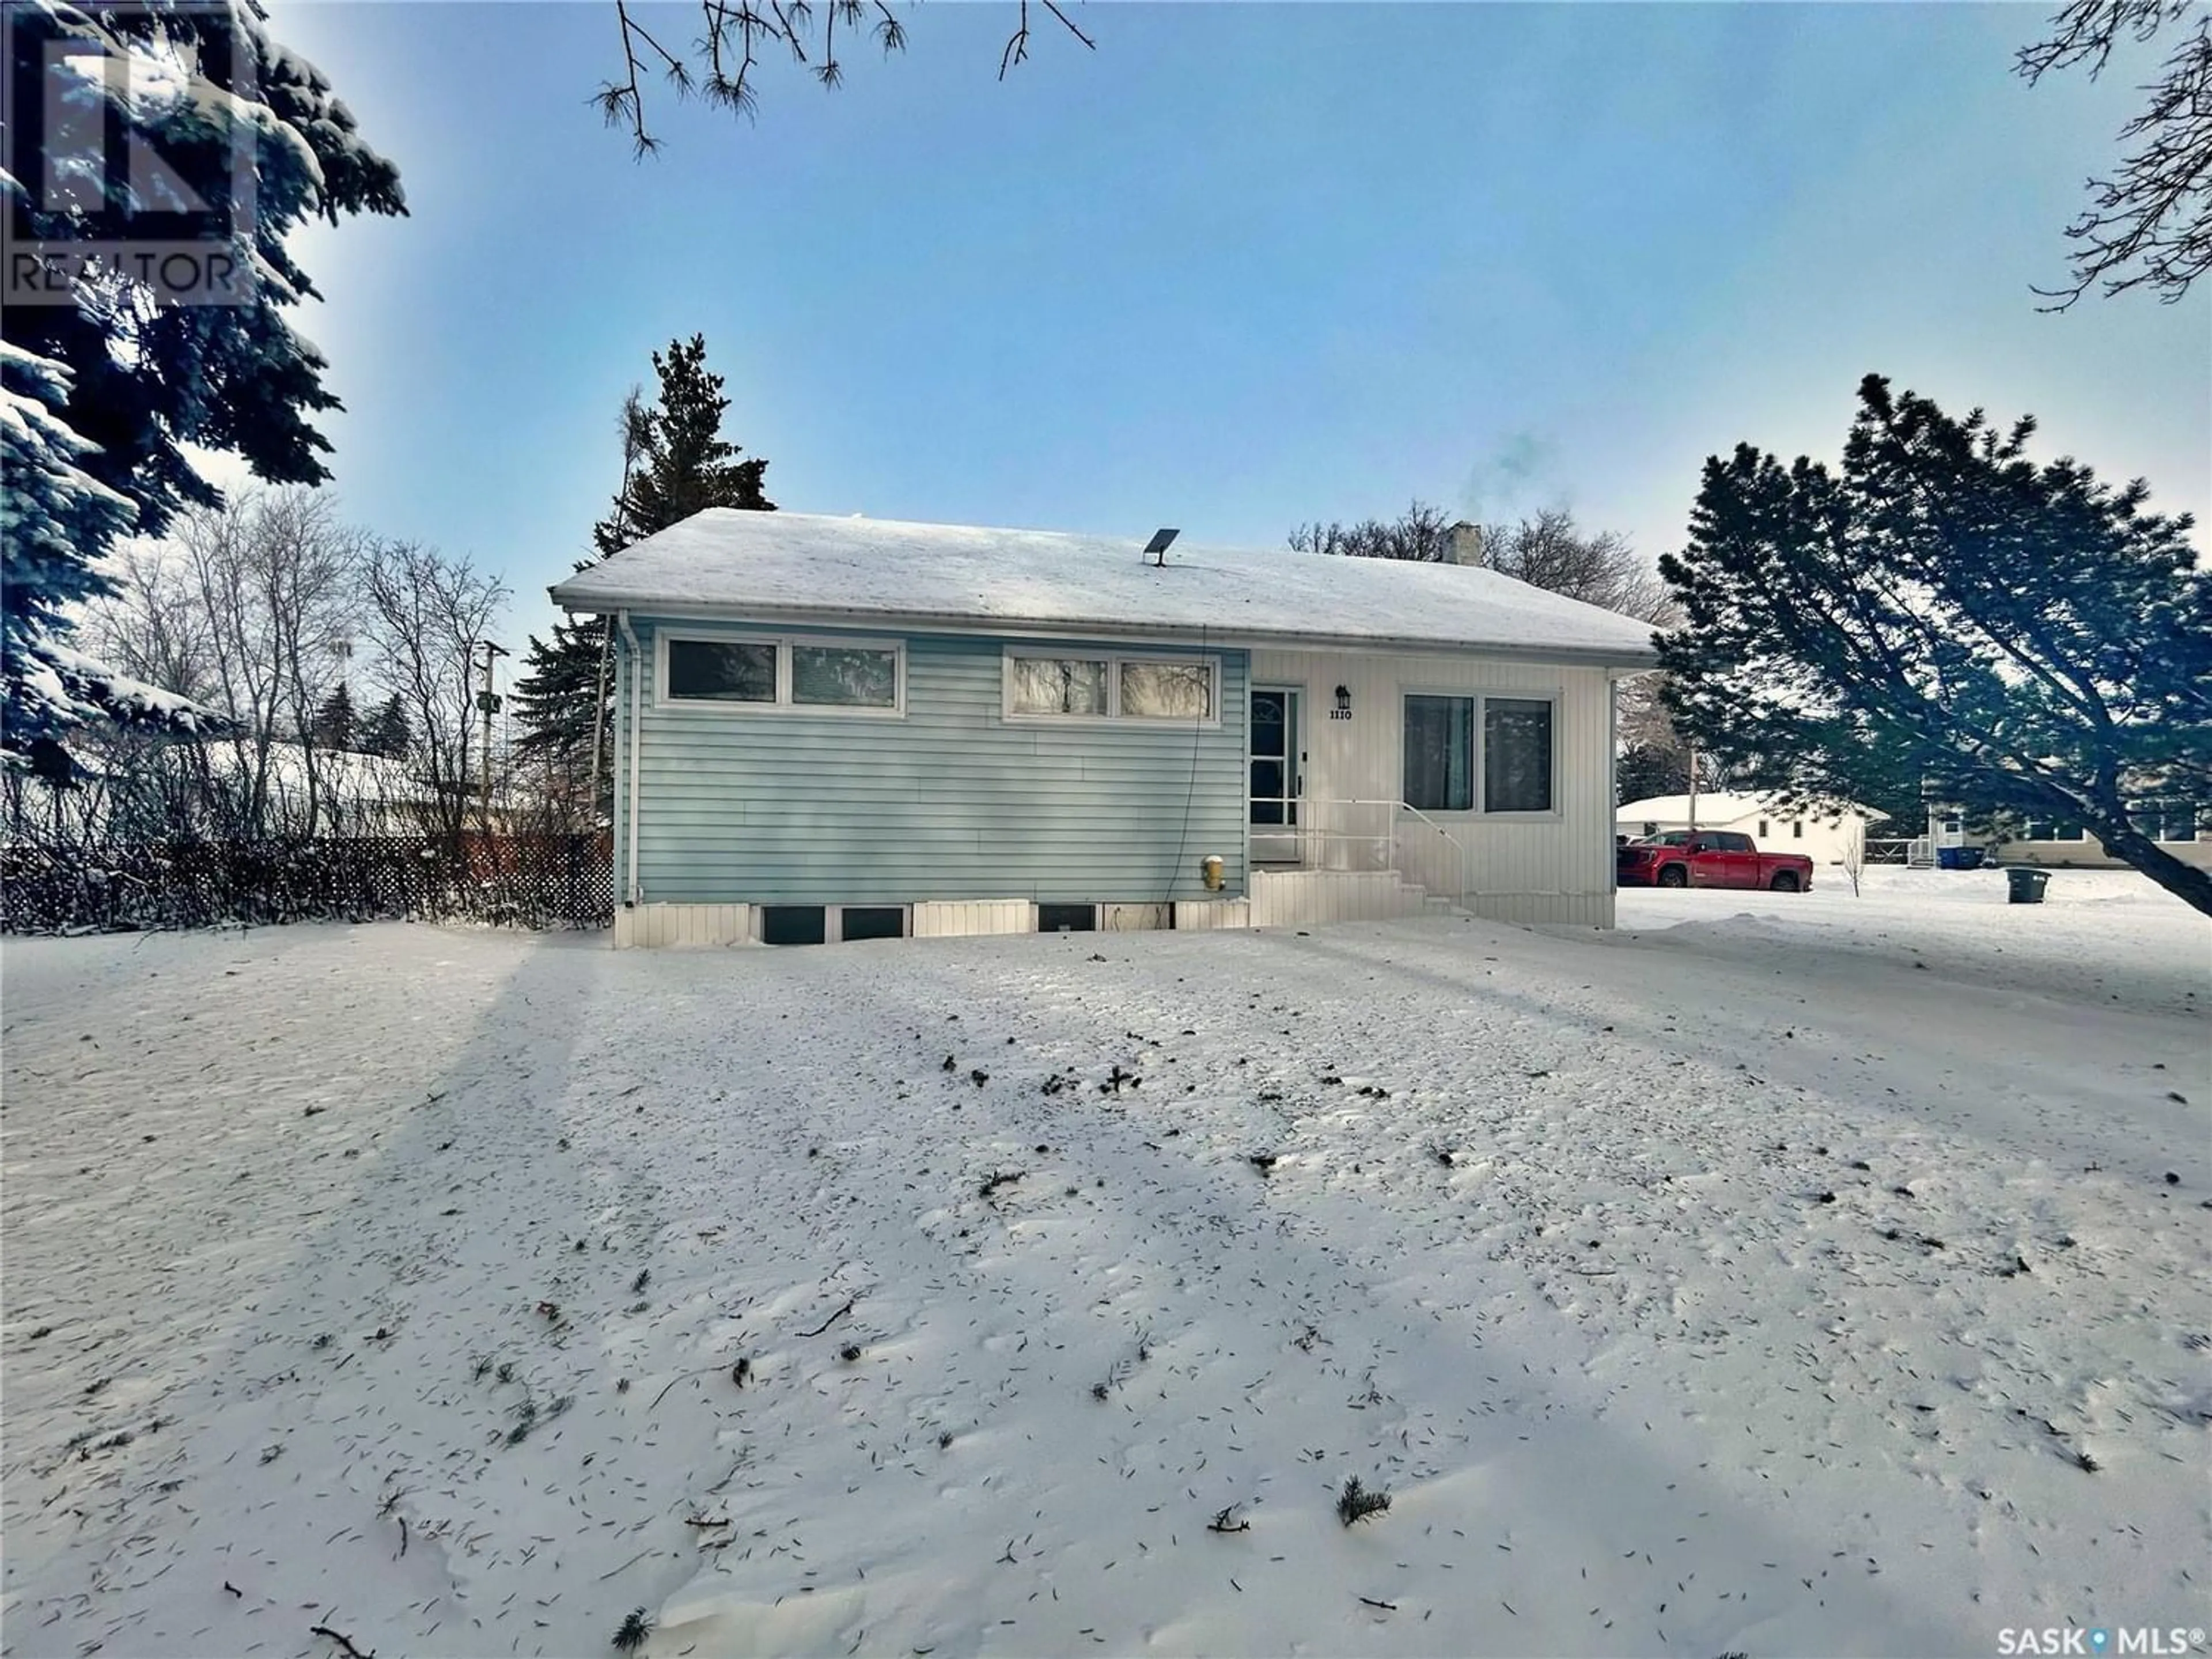 Home with unknown exterior material for 1110 Windover AVENUE, Moosomin Saskatchewan S0G3N0